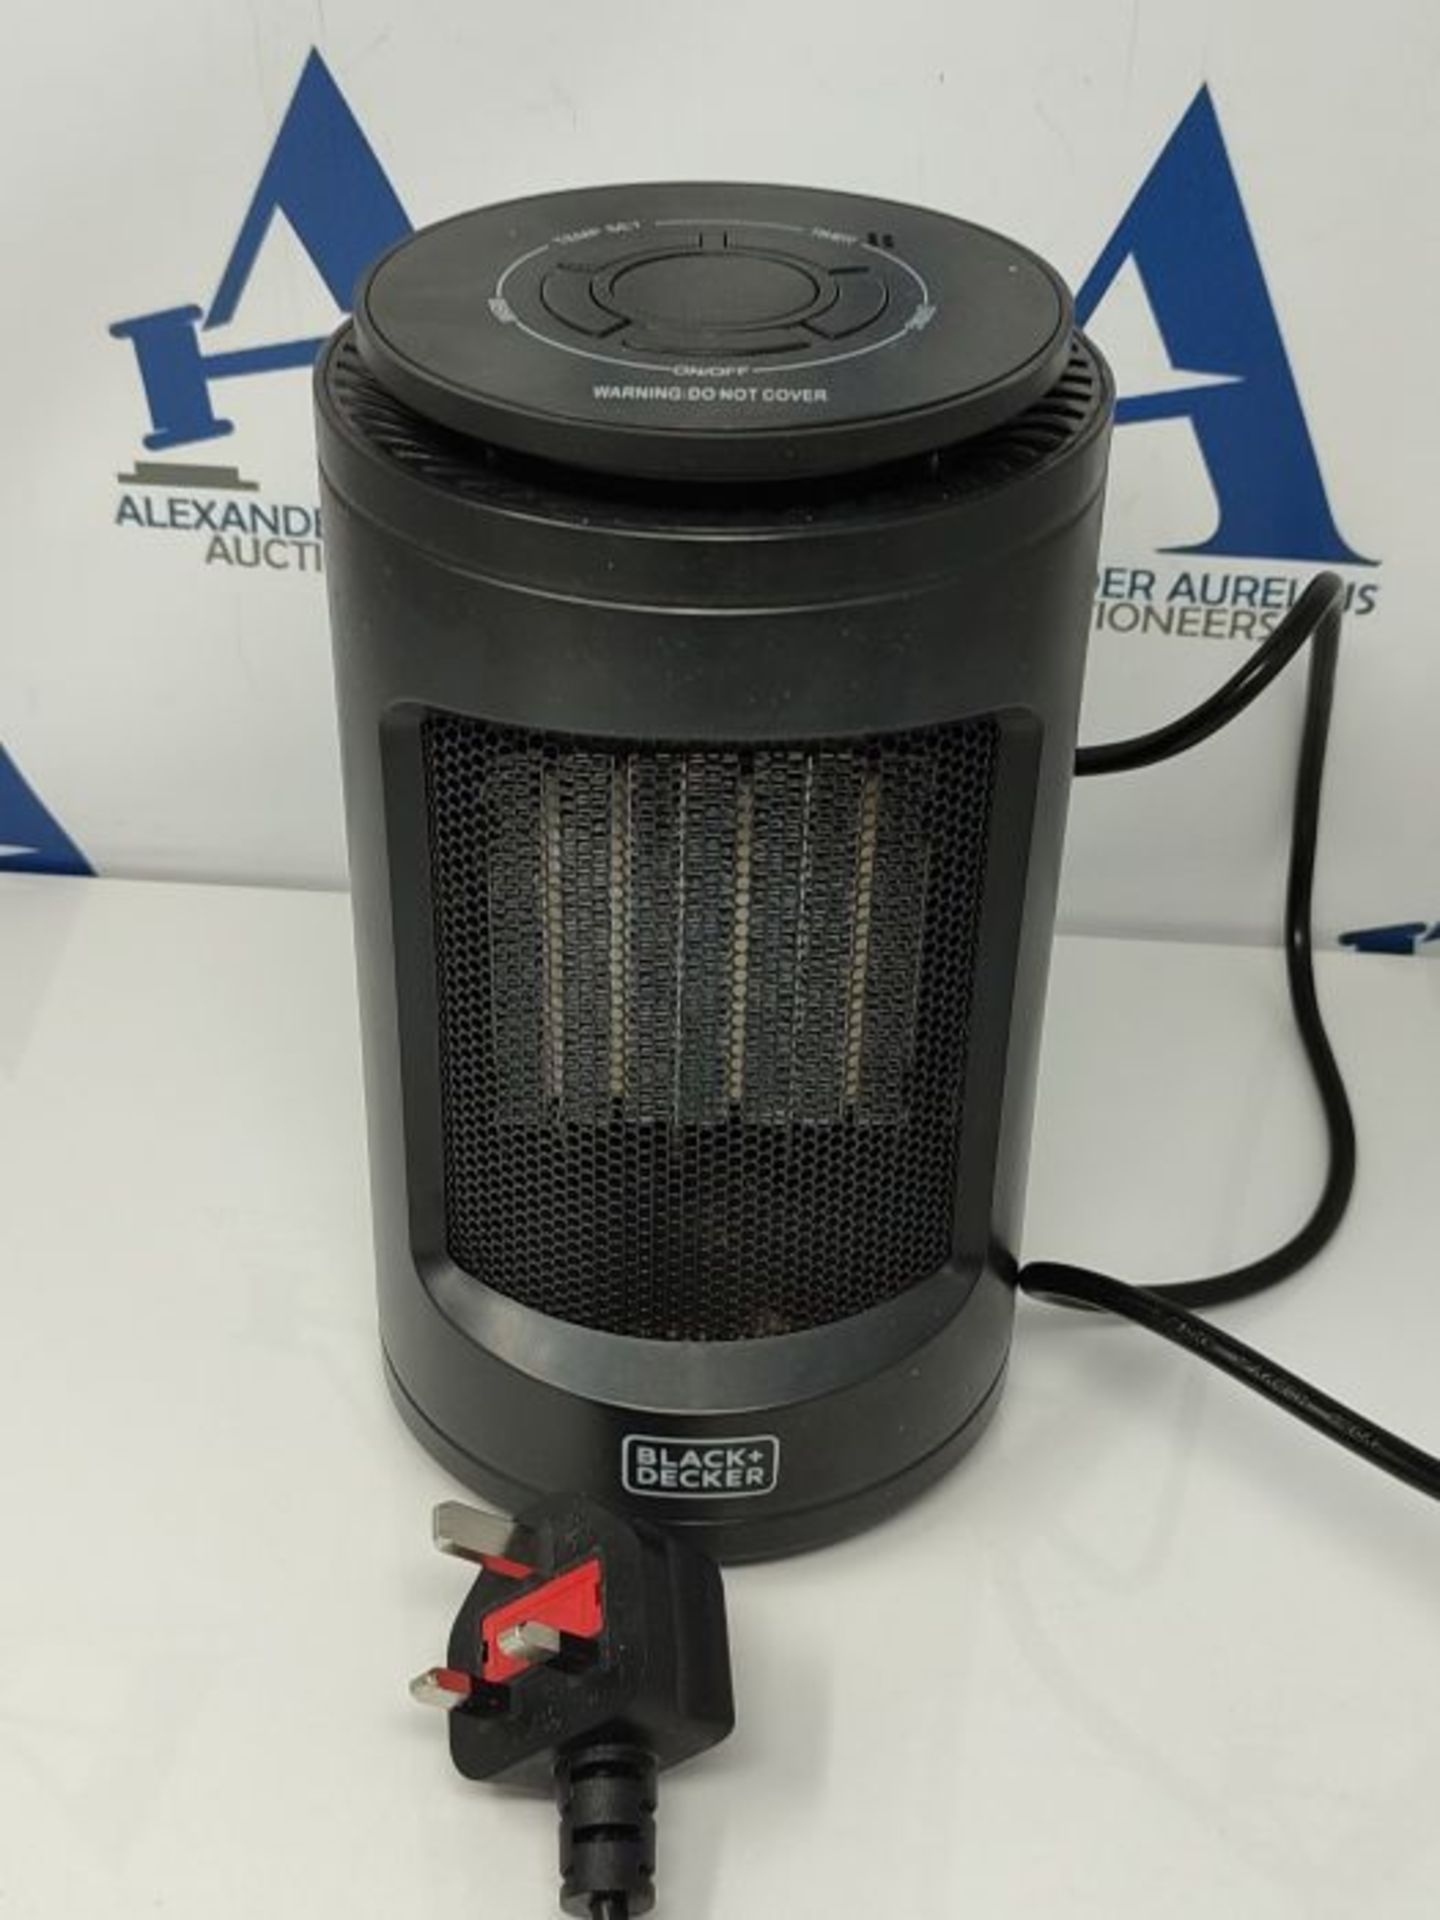 BLACK+DECKER BXSH37013GB Digital Ceramic Tower Heater with Climate Control, 9 Hour Tim - Image 3 of 3